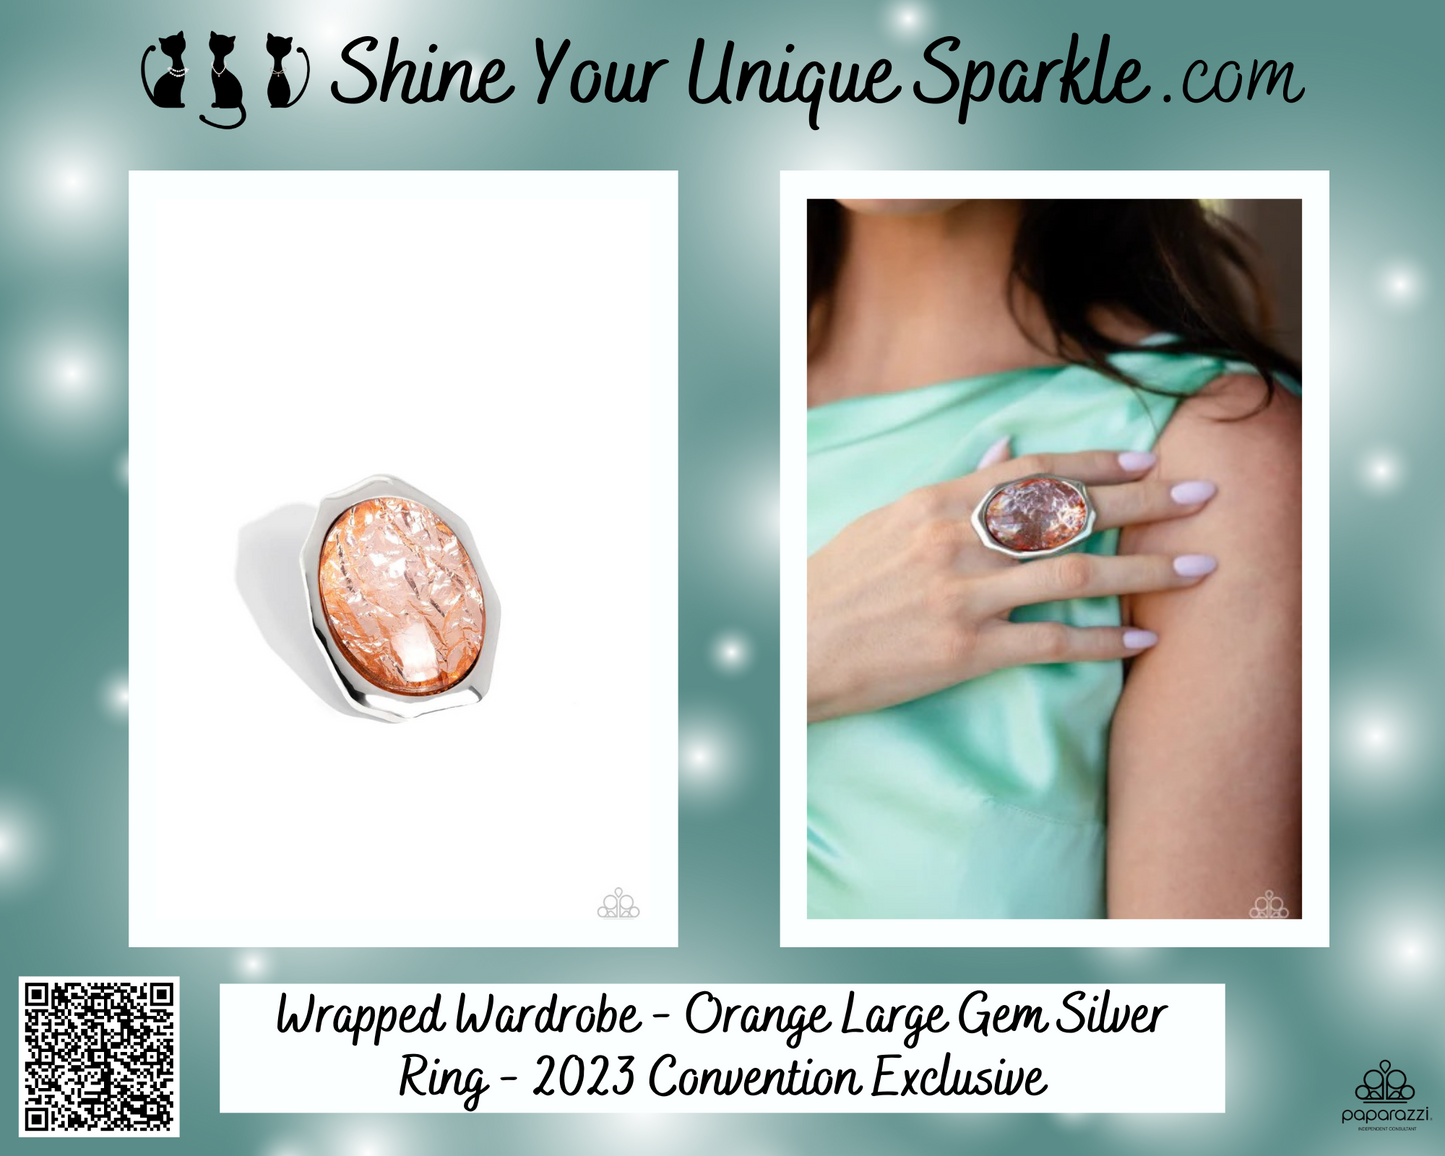 Wrapped Wardrobe - Orange Large Gem Silver Ring - 2023 Convention Exclusive